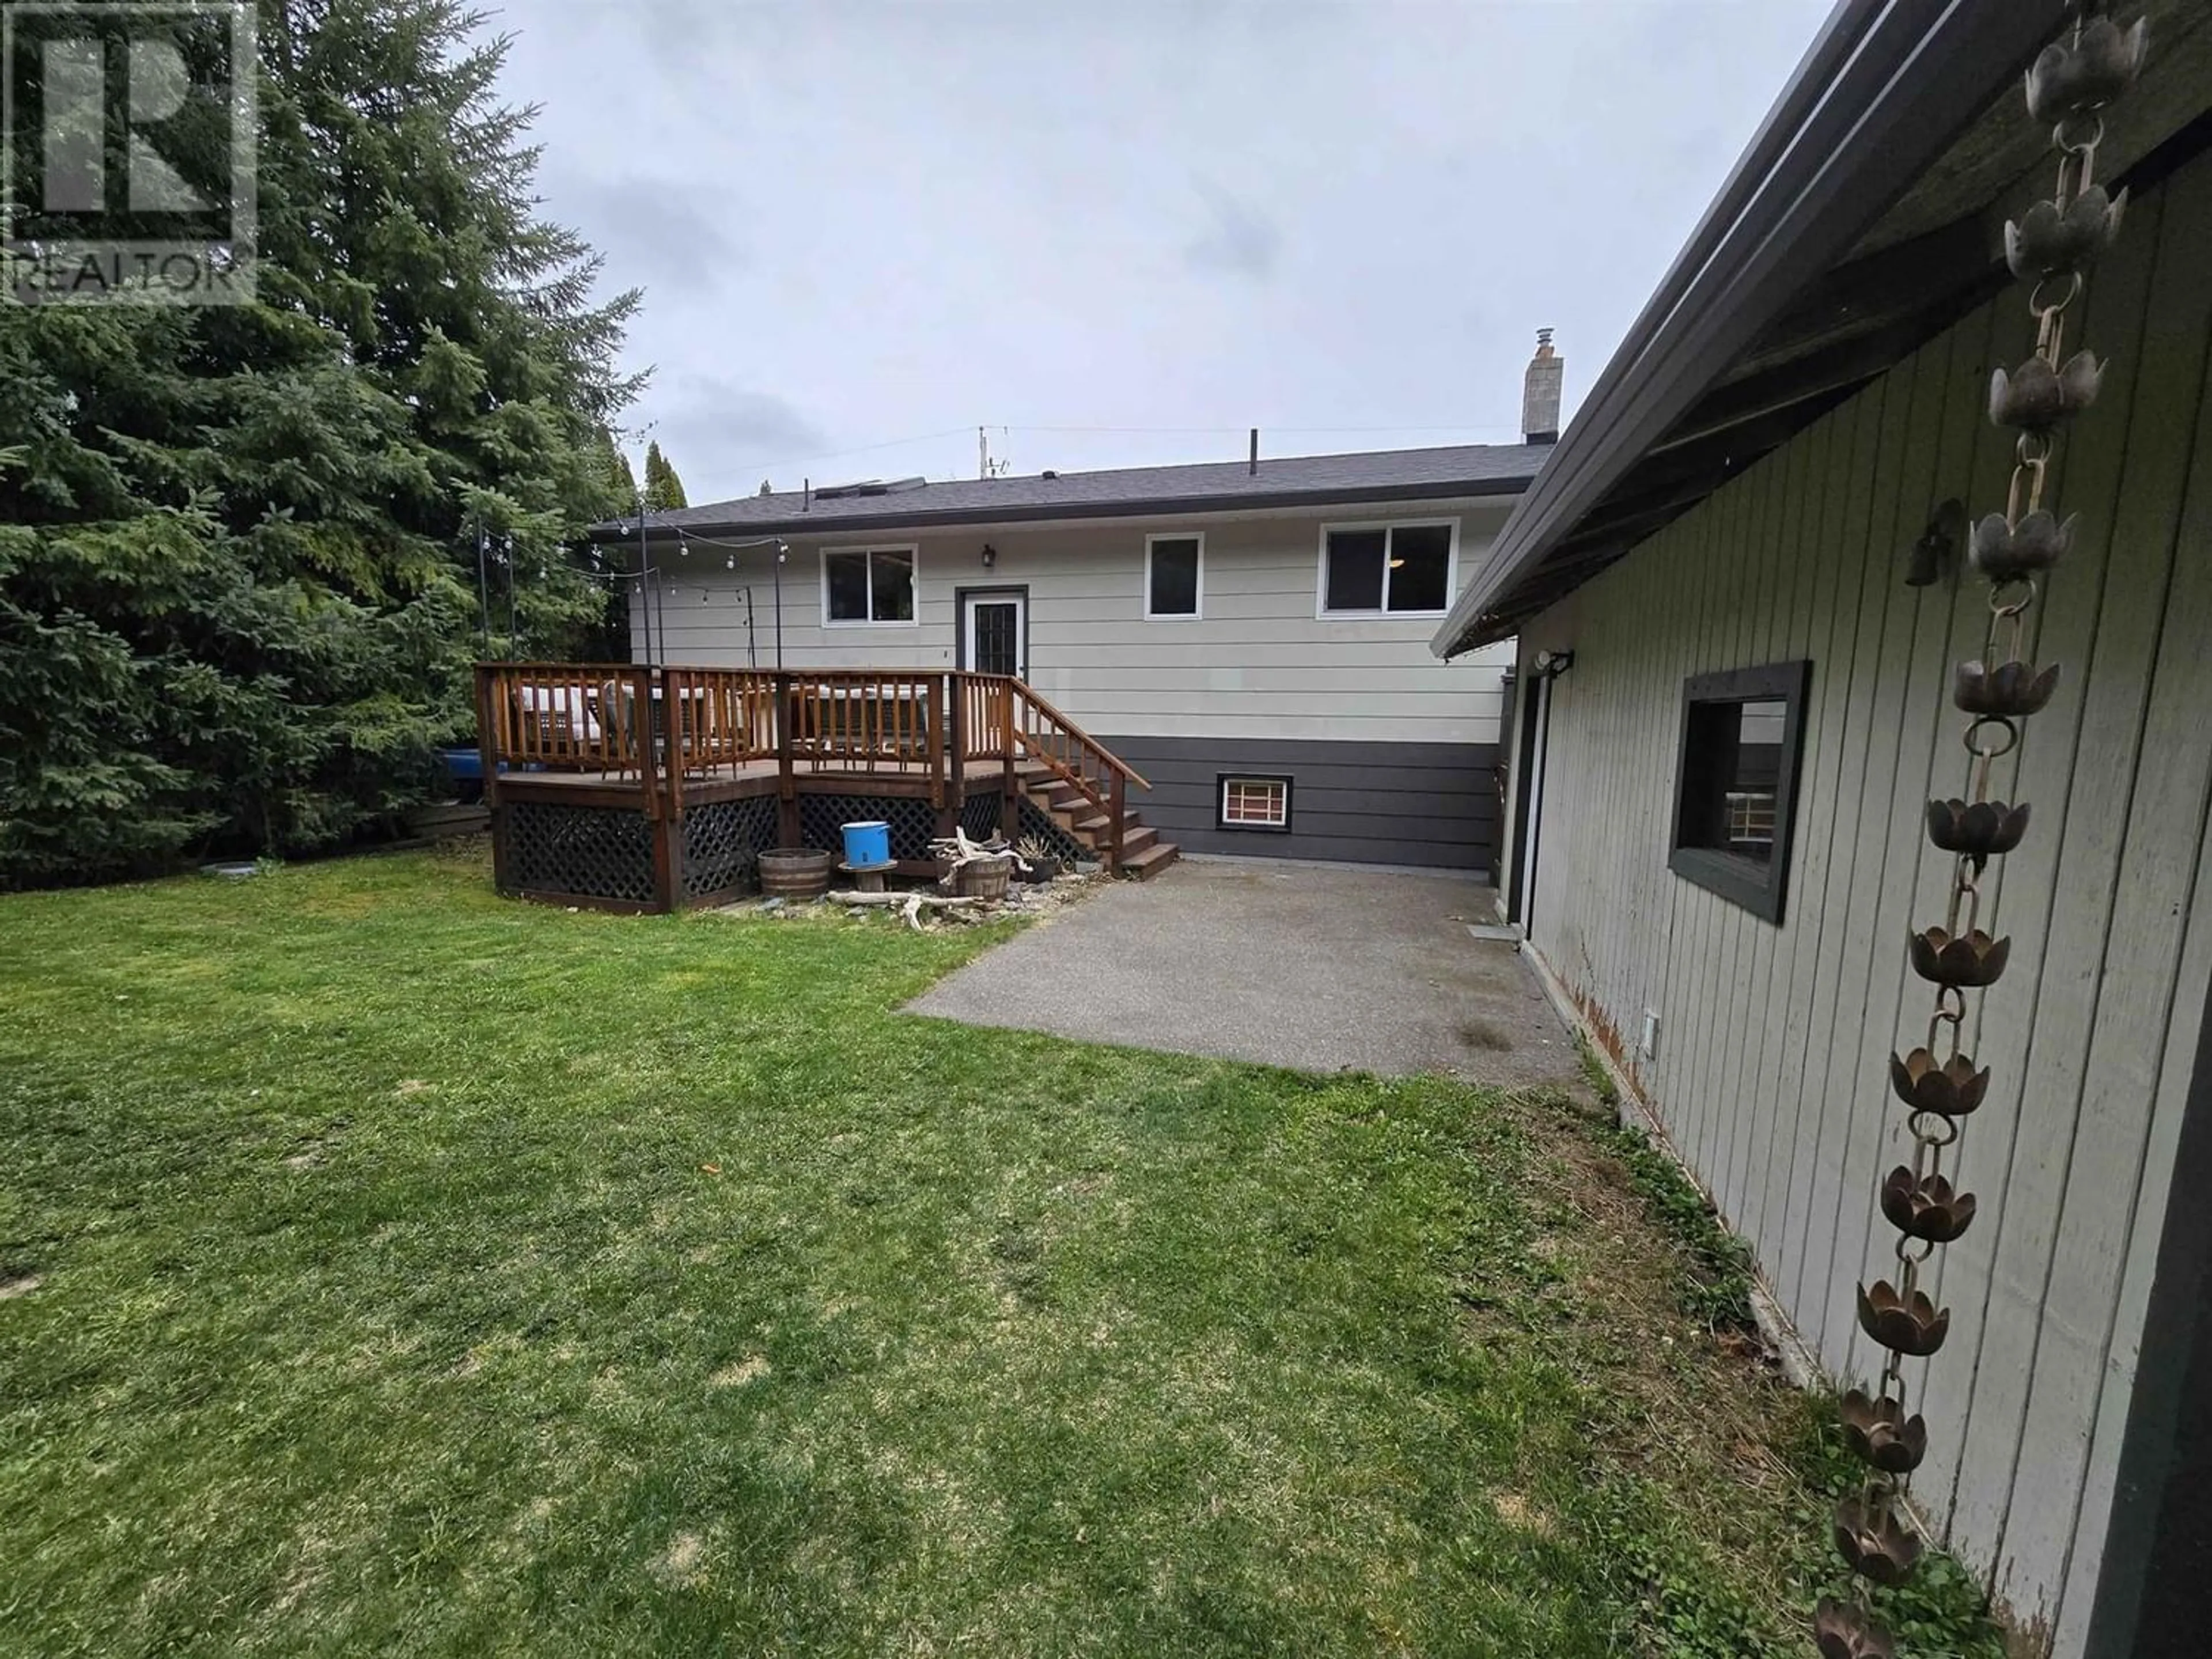 Frontside or backside of a home for 3666 HAWTHORNE AVENUE, Terrace British Columbia V8G5E2